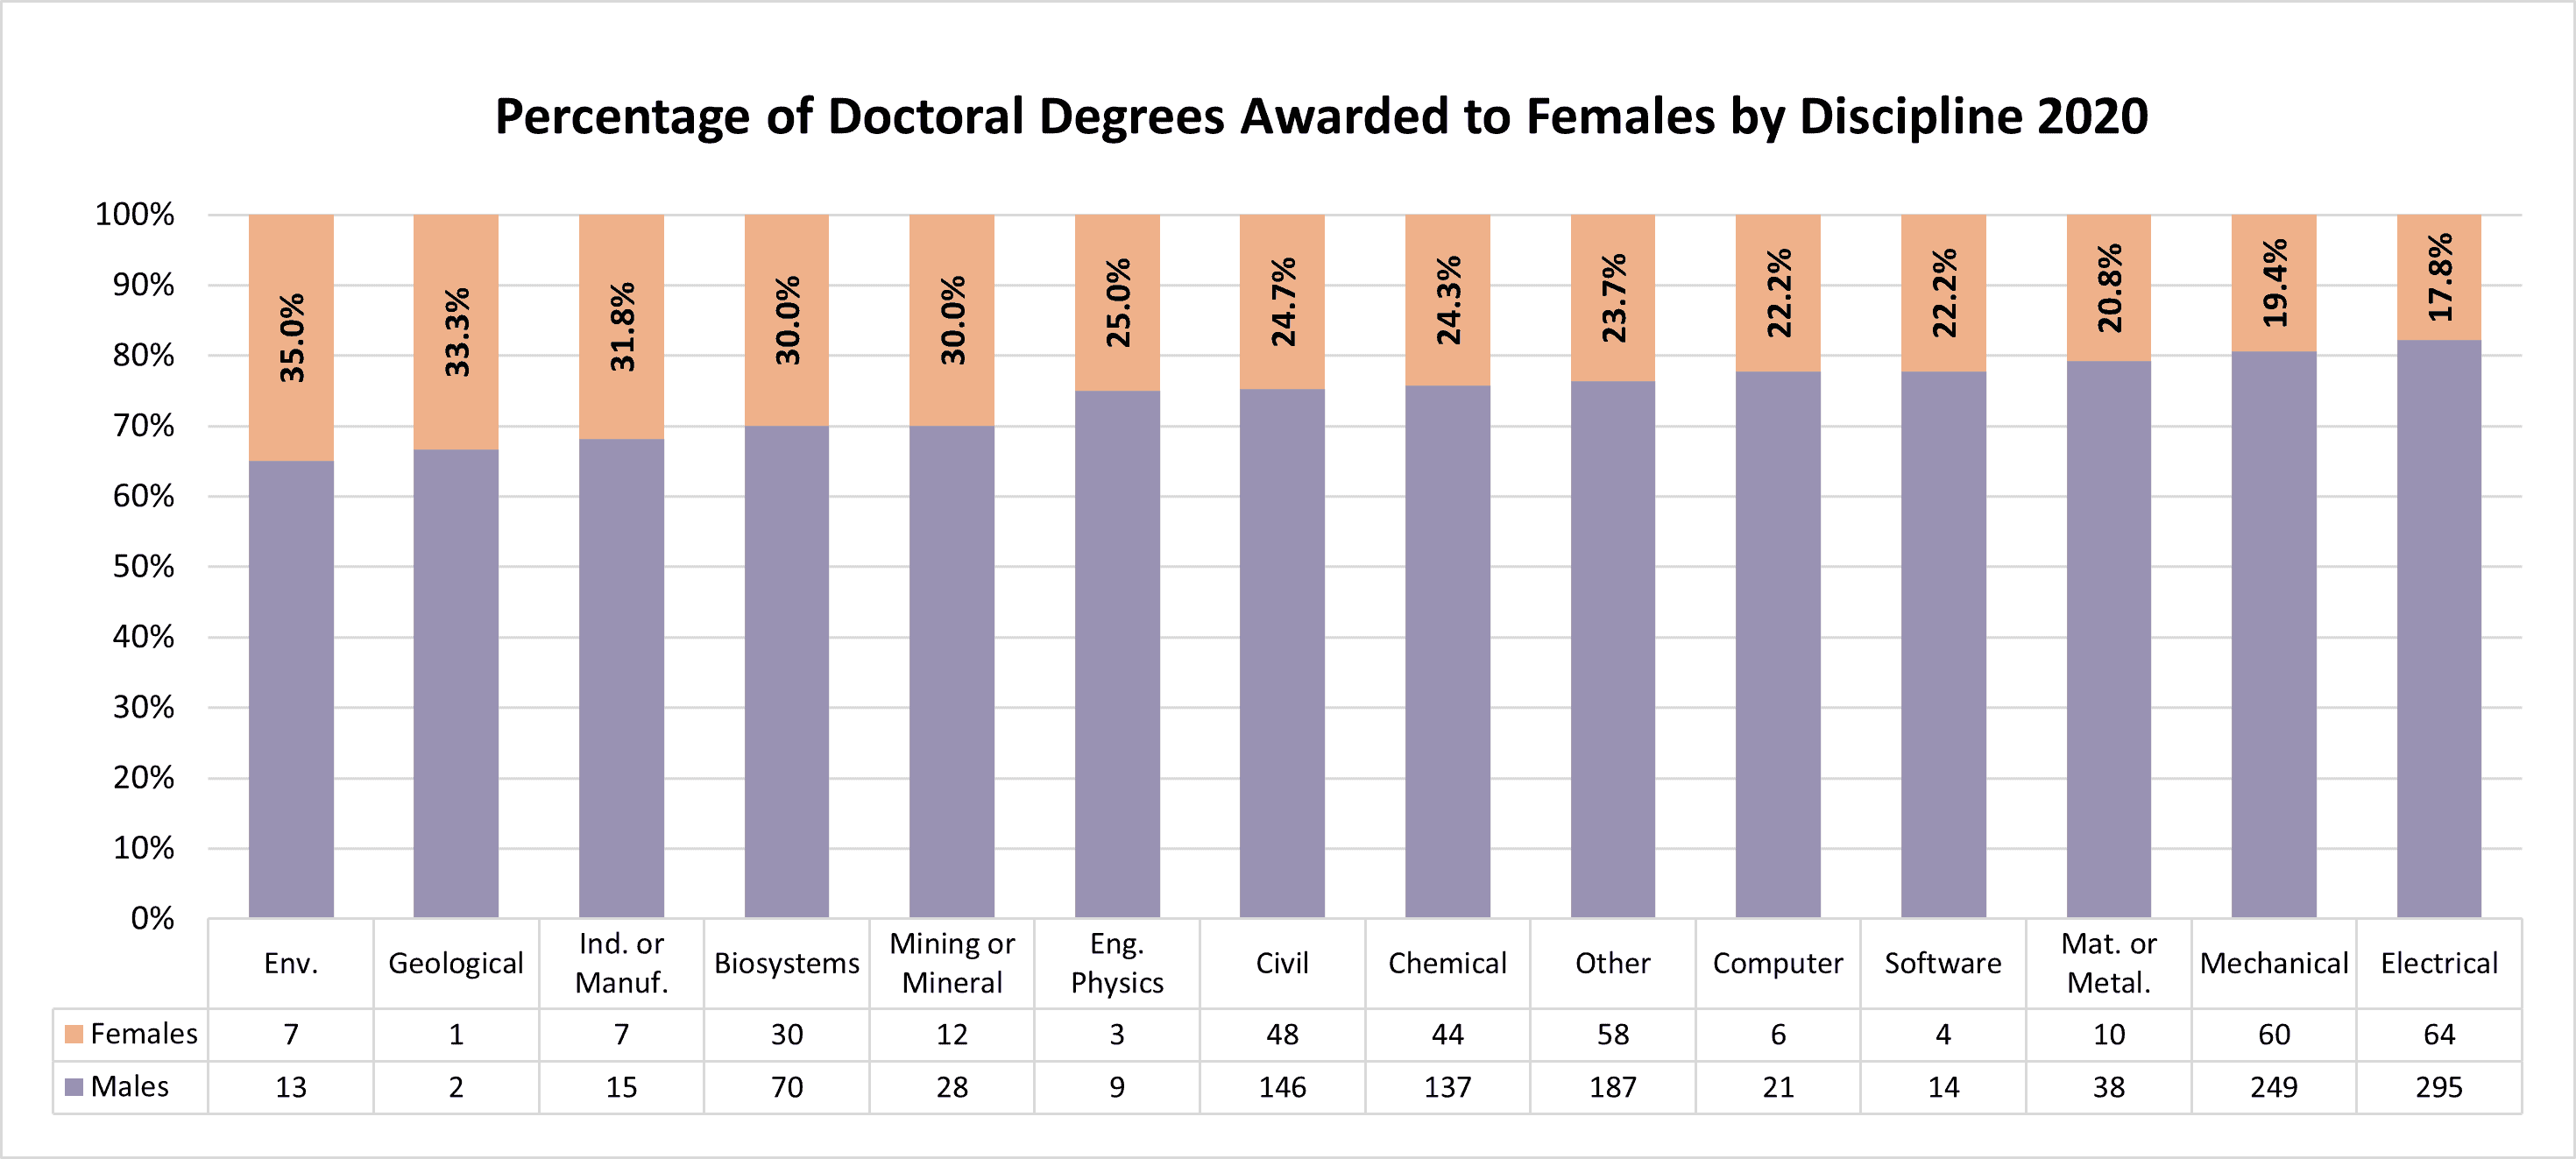 Percentage of Doctoral degrees awarded to females by discipline 2020